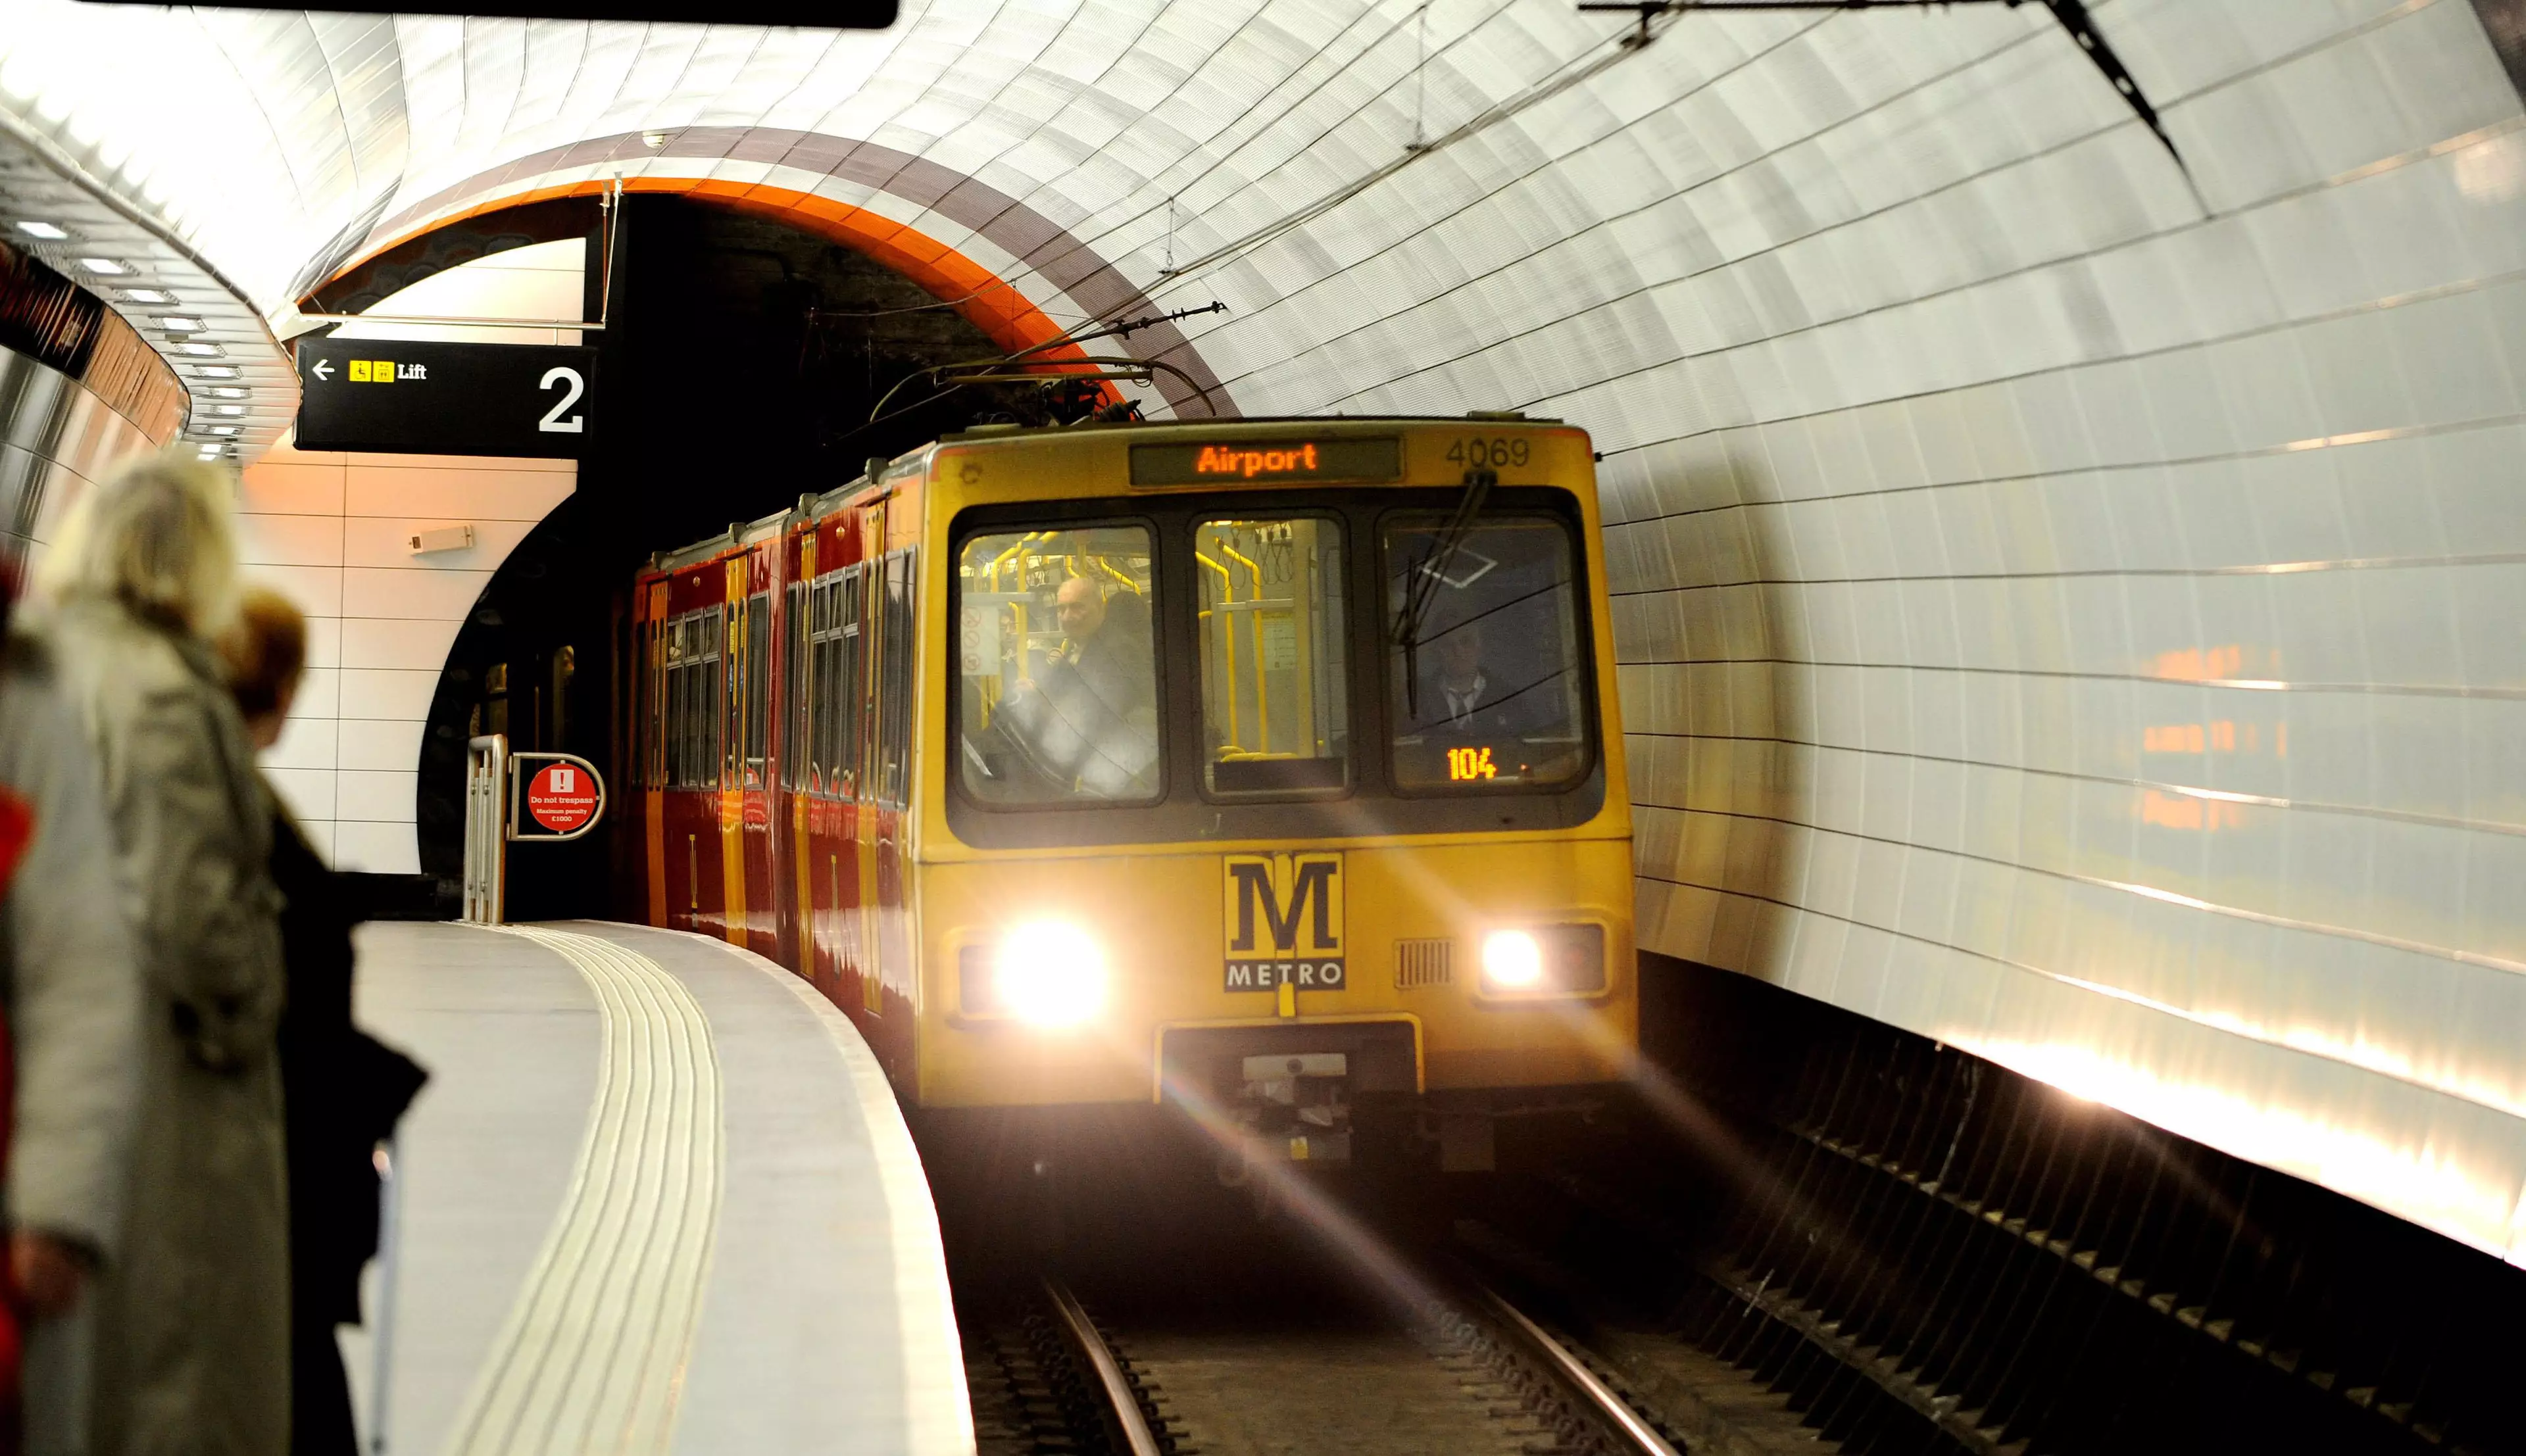 The Metro service was cancelled after a passenger pooped on the train.